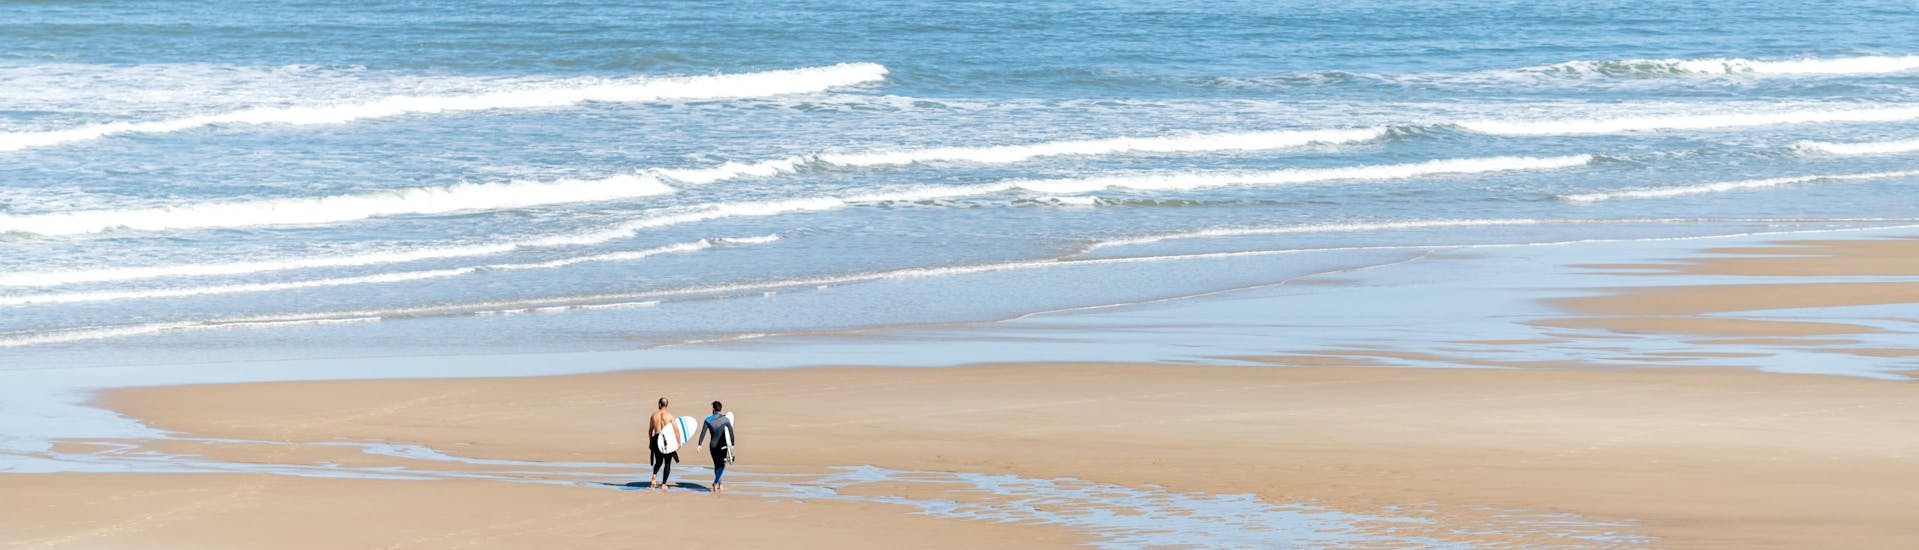 Two men are walking on the Plage Centrale of Lacanau with their surfboard under their arm, where many surfing lessons take place.